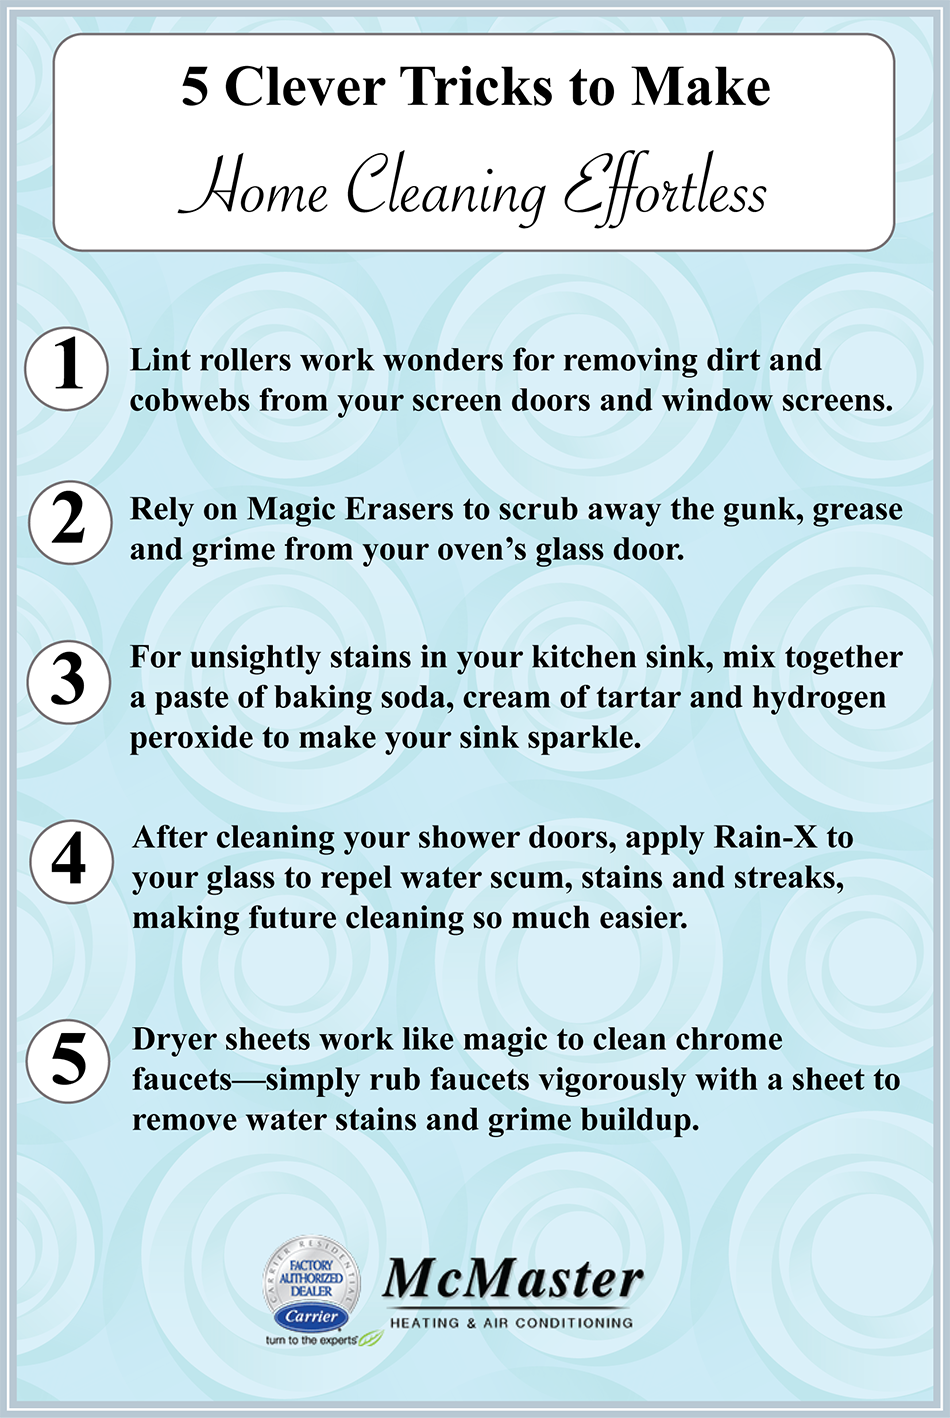 5 Tips and Tricks to Make Home Cleaning Effortless